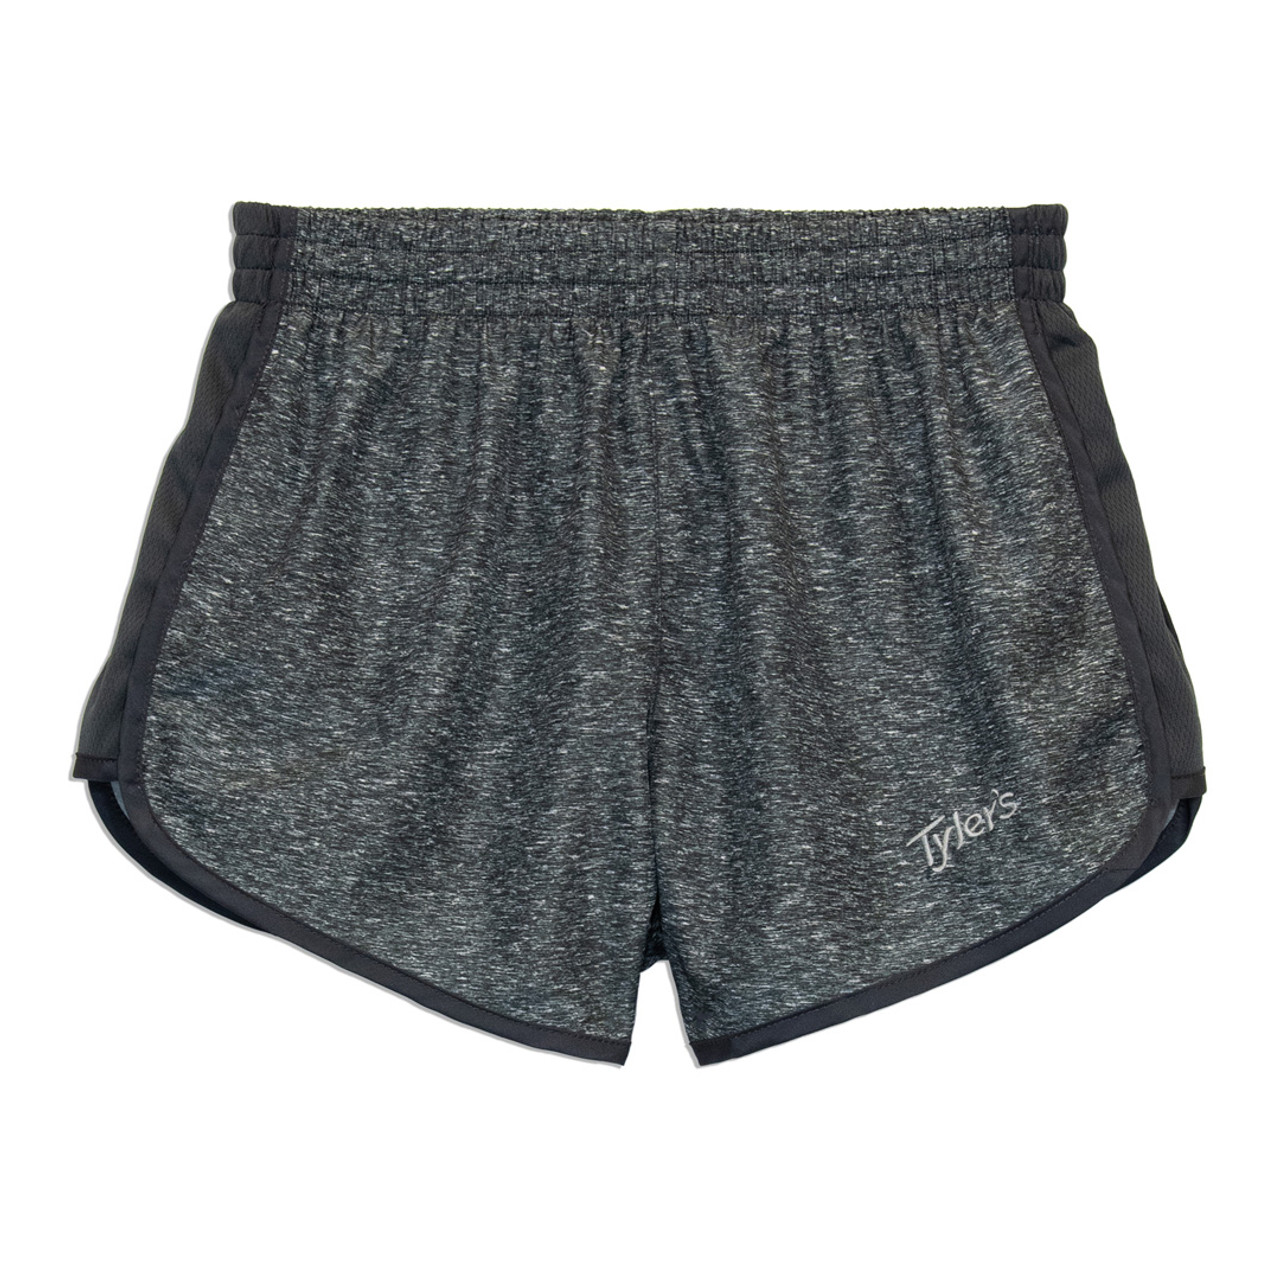 Concepts Sport Utah State Aggies Mainstream Shorts - Charcoal $ 29.99 -  SLOCOG'S | SLOCOG'S Women's Heather Racer Shorts